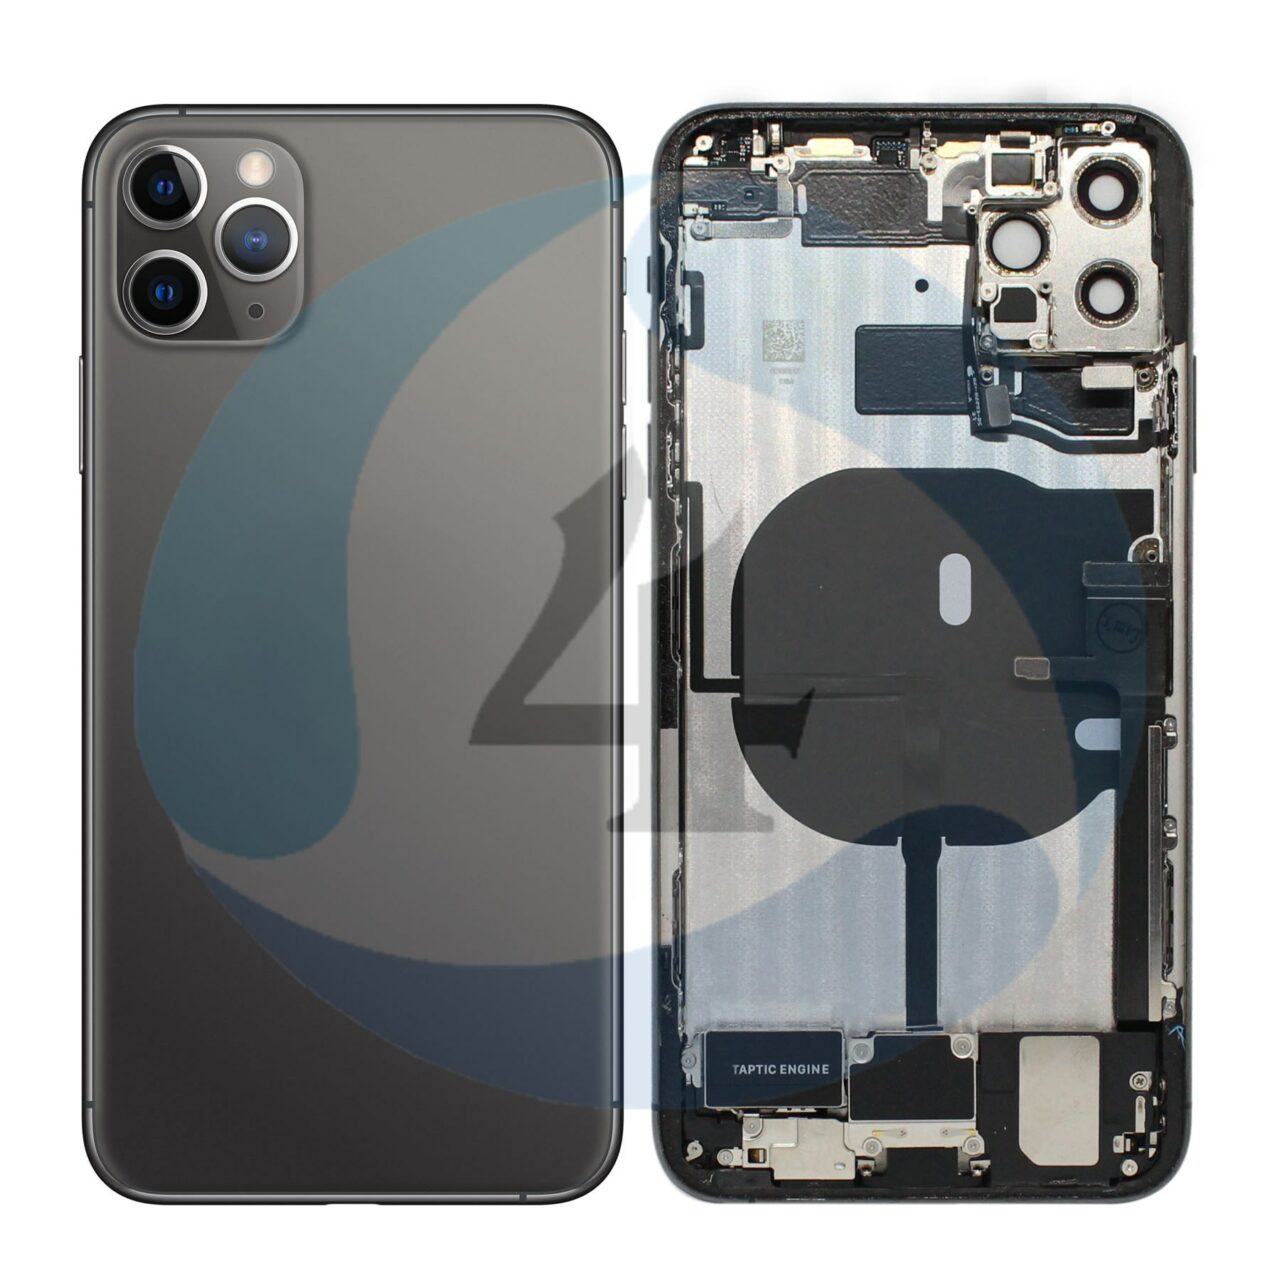 Iphone 11 Max Pro backcover housing Black